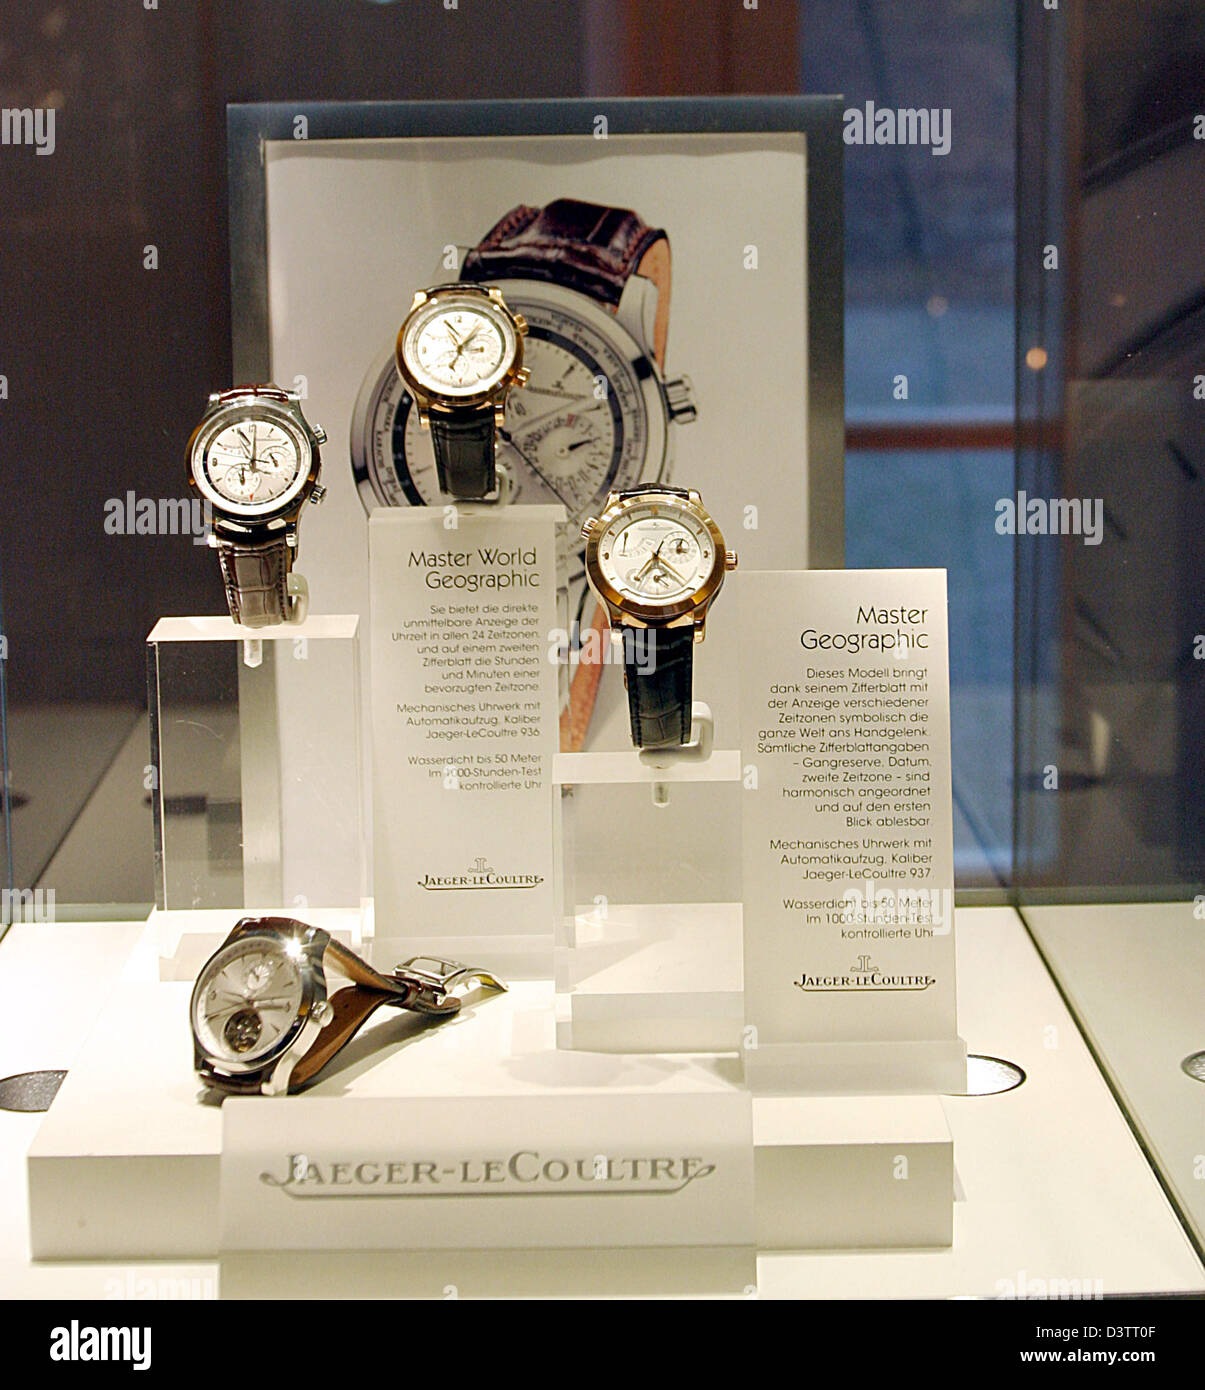 The picture shows the logo and watches of Swiss watch manufacturer ' Jaeger-Le Coultre' in Berlin, Germany, Sunday, 05 November 2006. Photo:  Xamax Stock Photo - Alamy